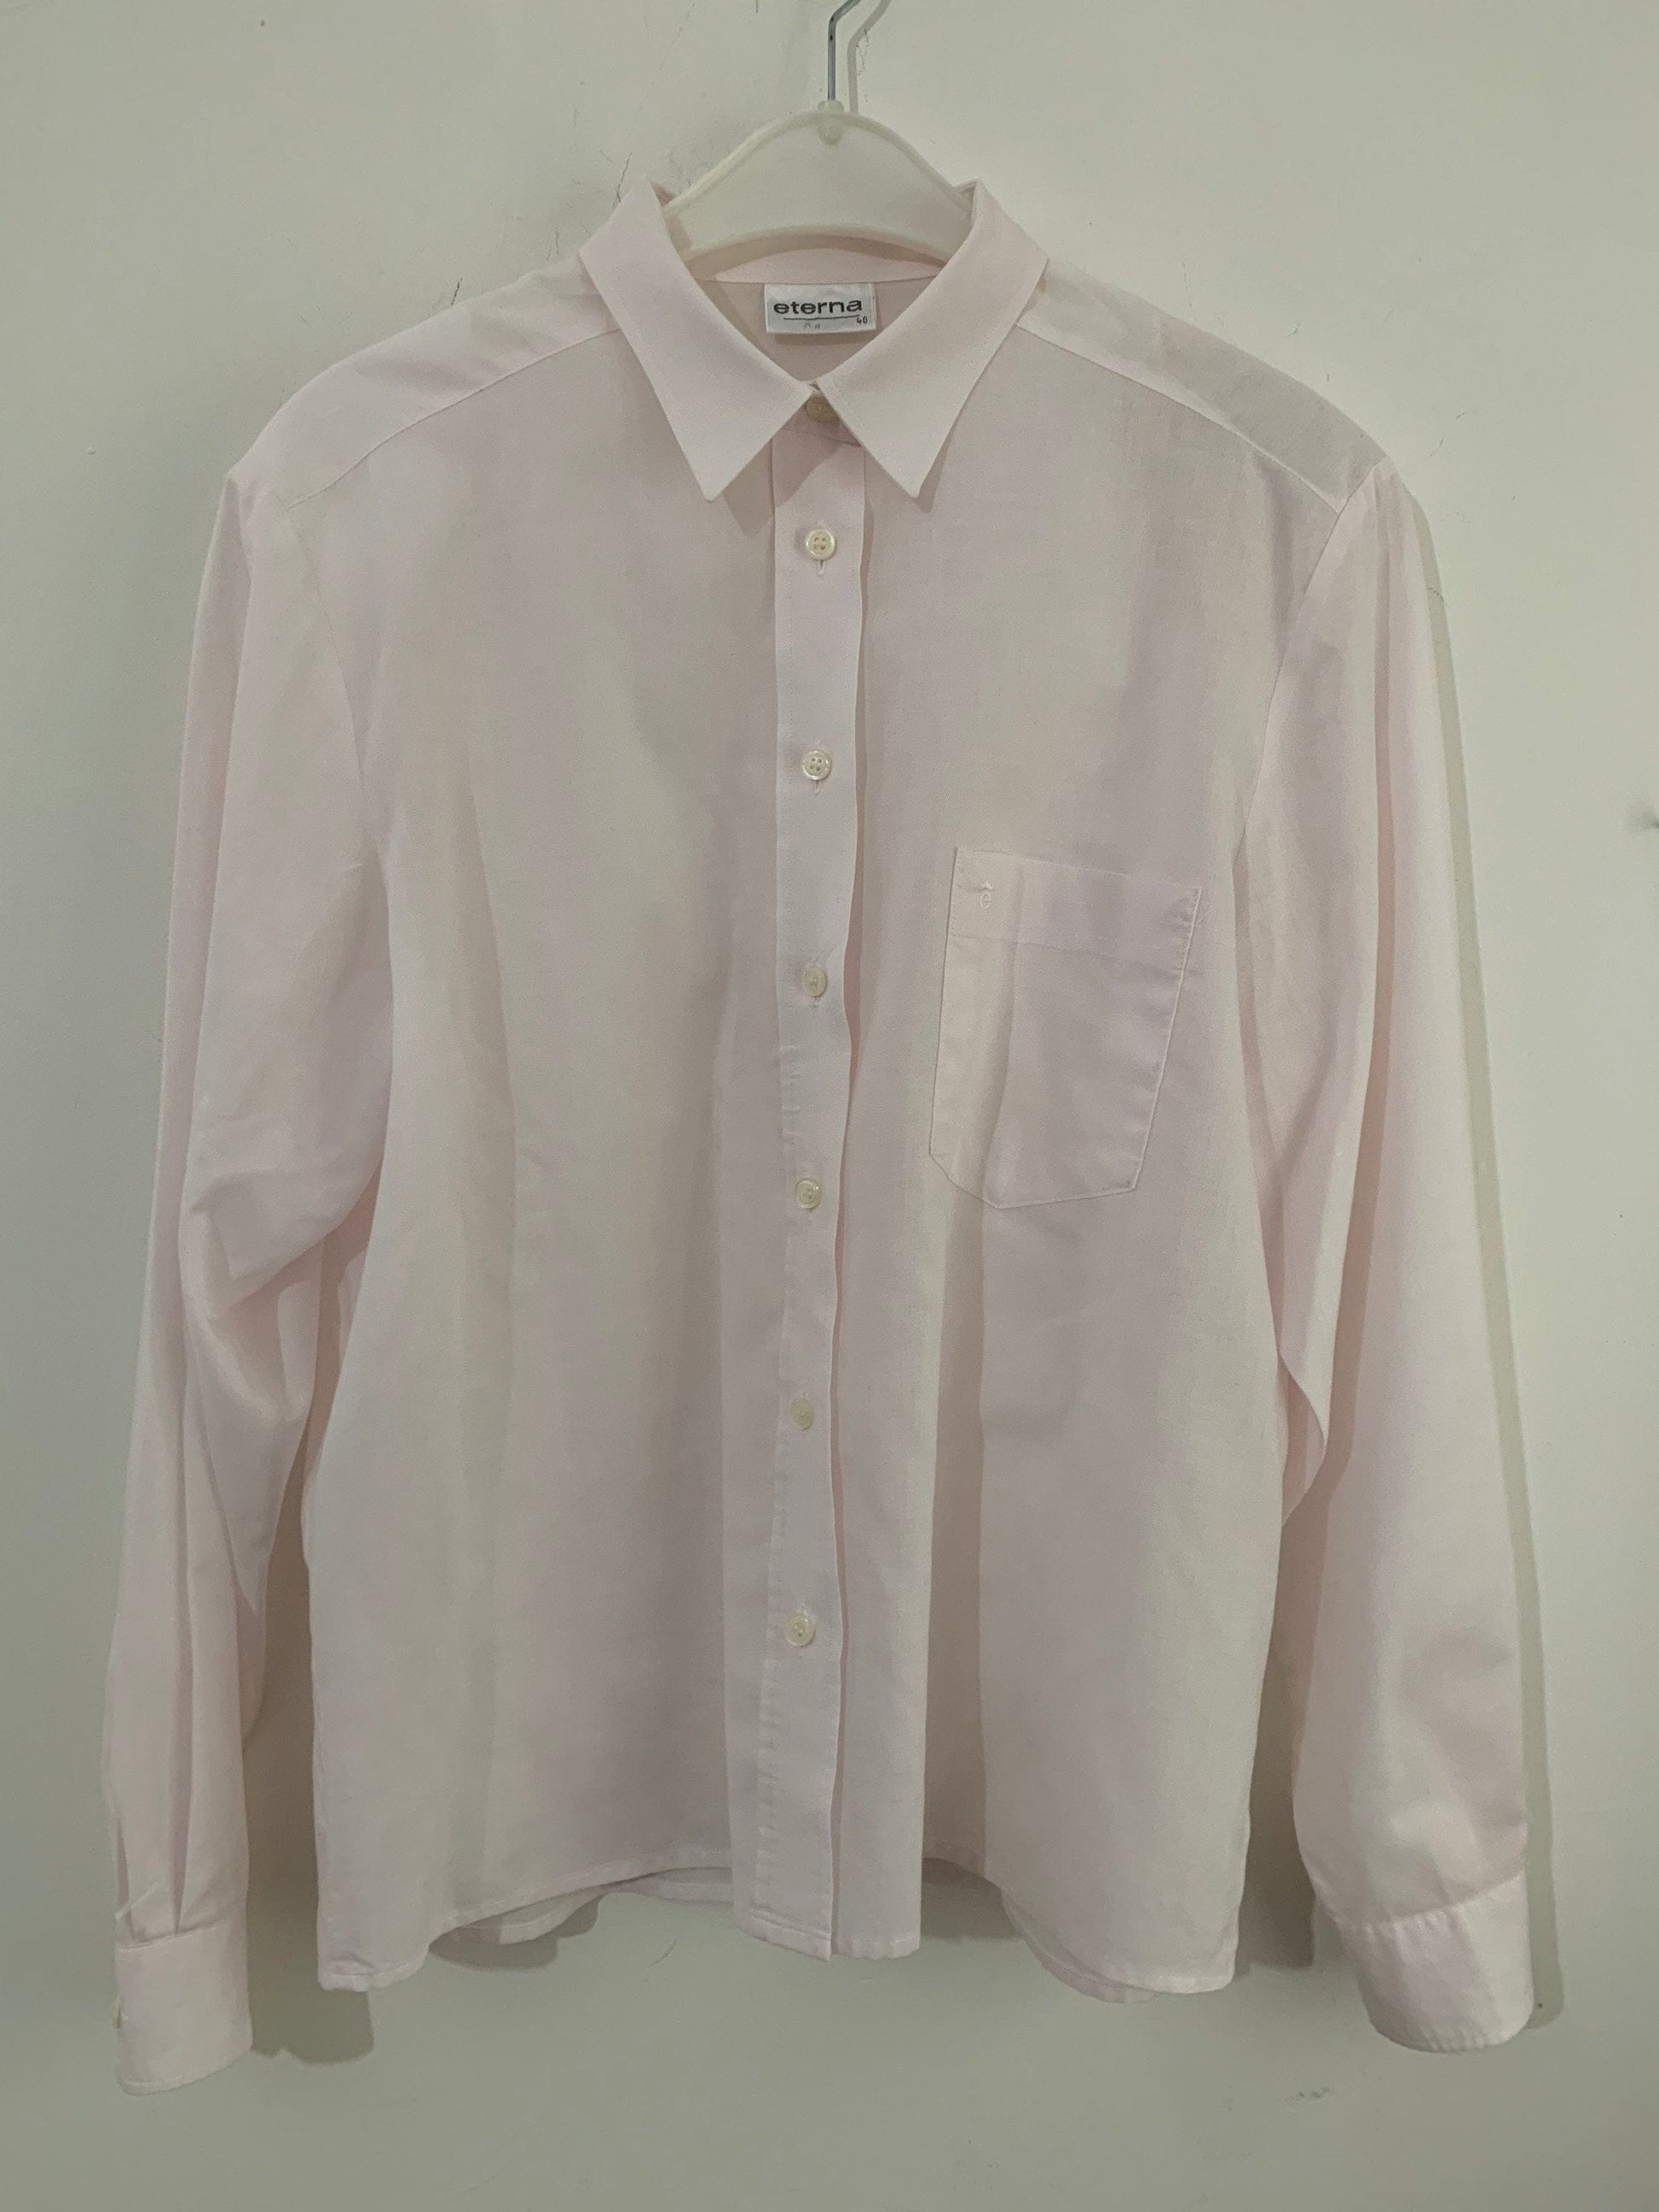 Pink Vintage Blouse Semi Sheer Button Through Boxy long Sleeves - Size 12